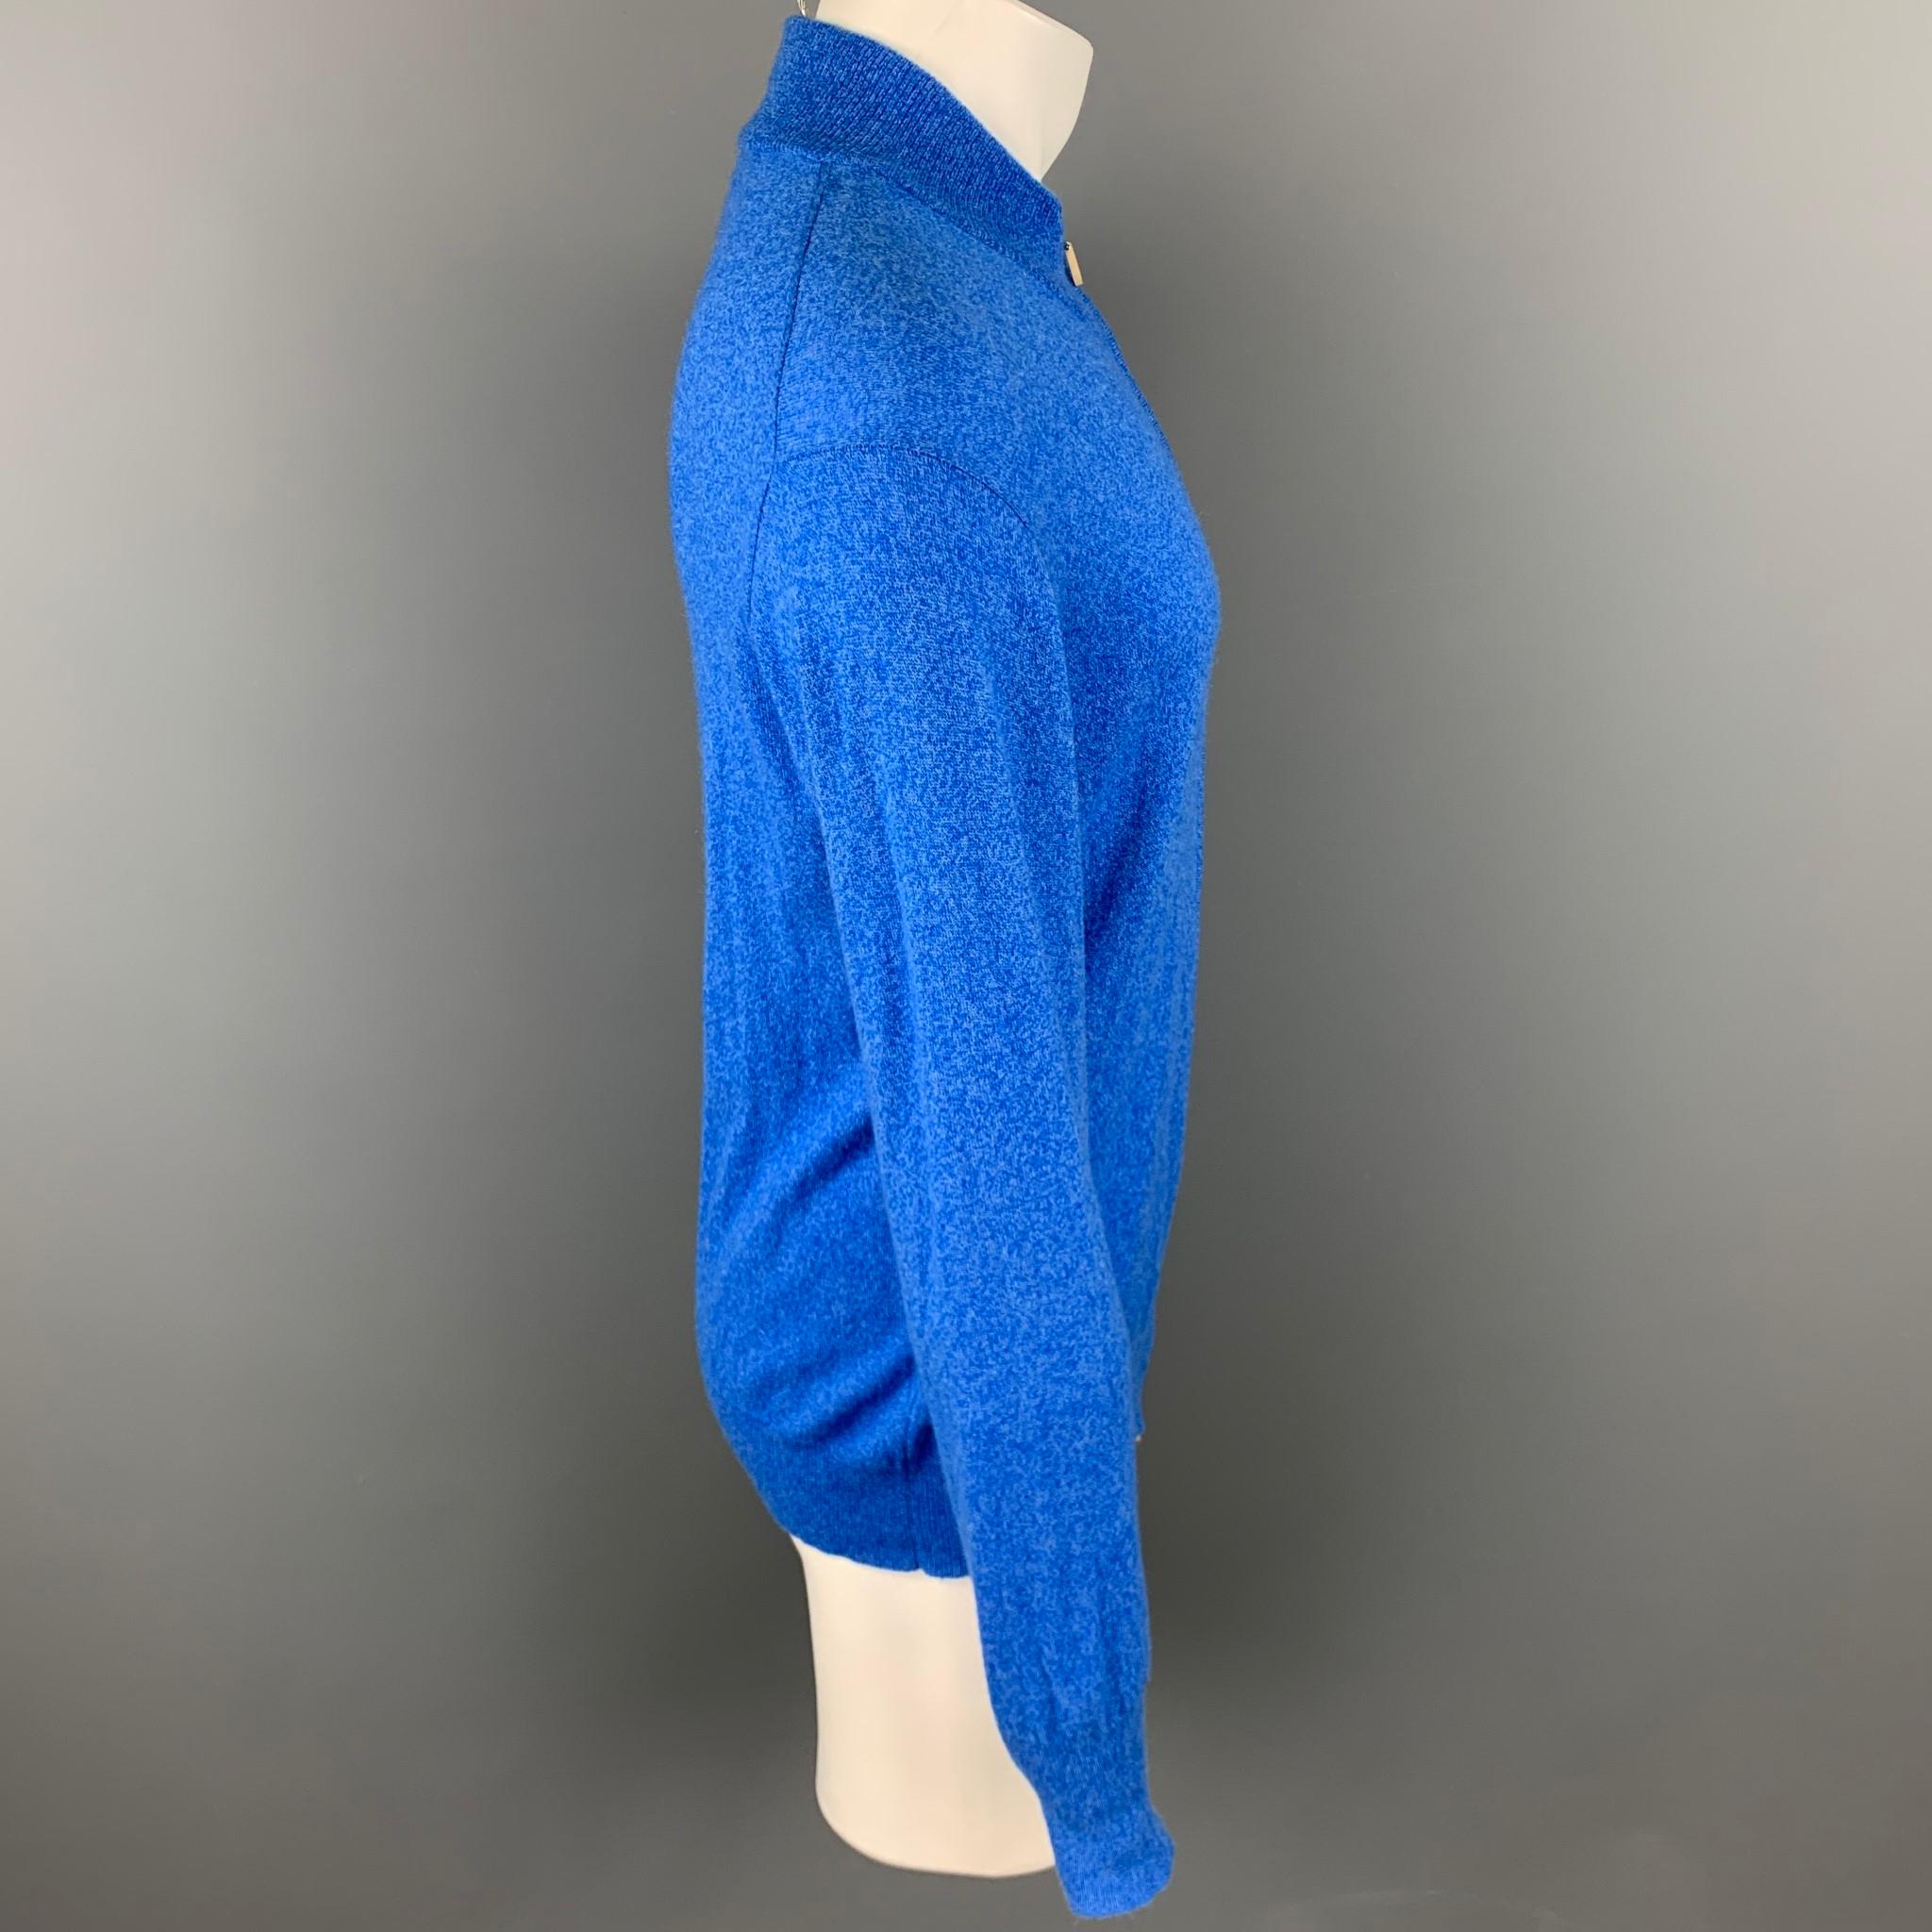 RICCARDO PIACENZA pullover comes in a blue heather cashmere featuring a high collar and a zip up closure. Made in Italy.

Very Good Pre-Owned Condition.
Marked: IT 50

Measurements:
 
Shoulder: 18 in. 
Chest: 40 in. 
Sleeve: 30 in. 
Length: 27 in. 